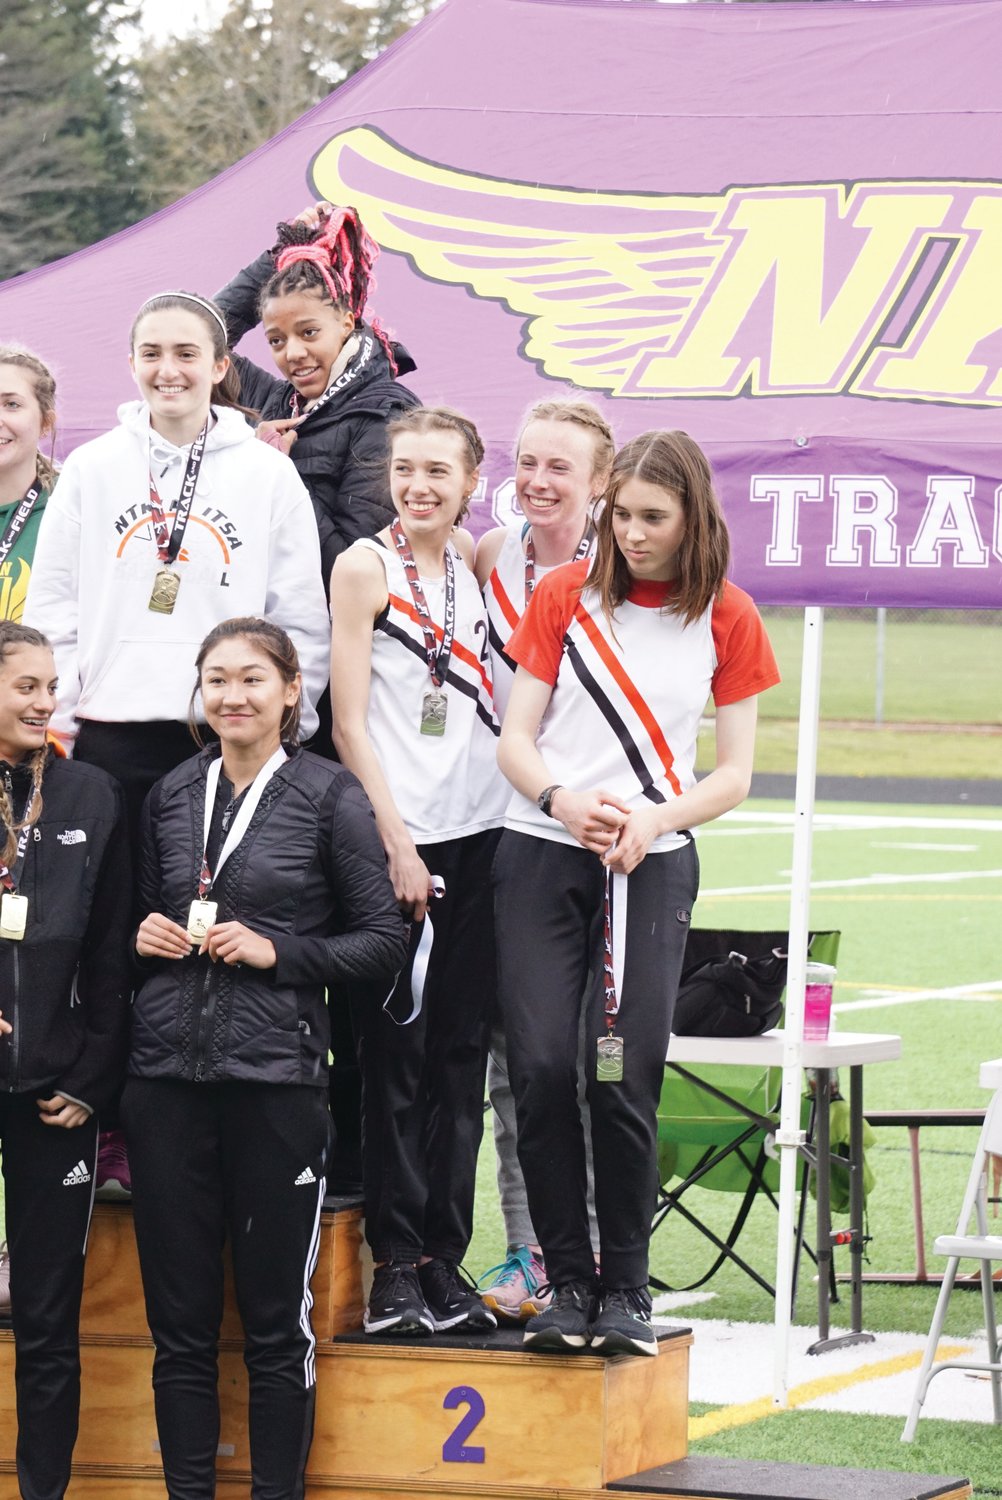 Members of the Rivals girls medley relay team (minus Lia Poore) pose during the awards ceremony at the Li’l Norway Invitational track event in Kitsap County.